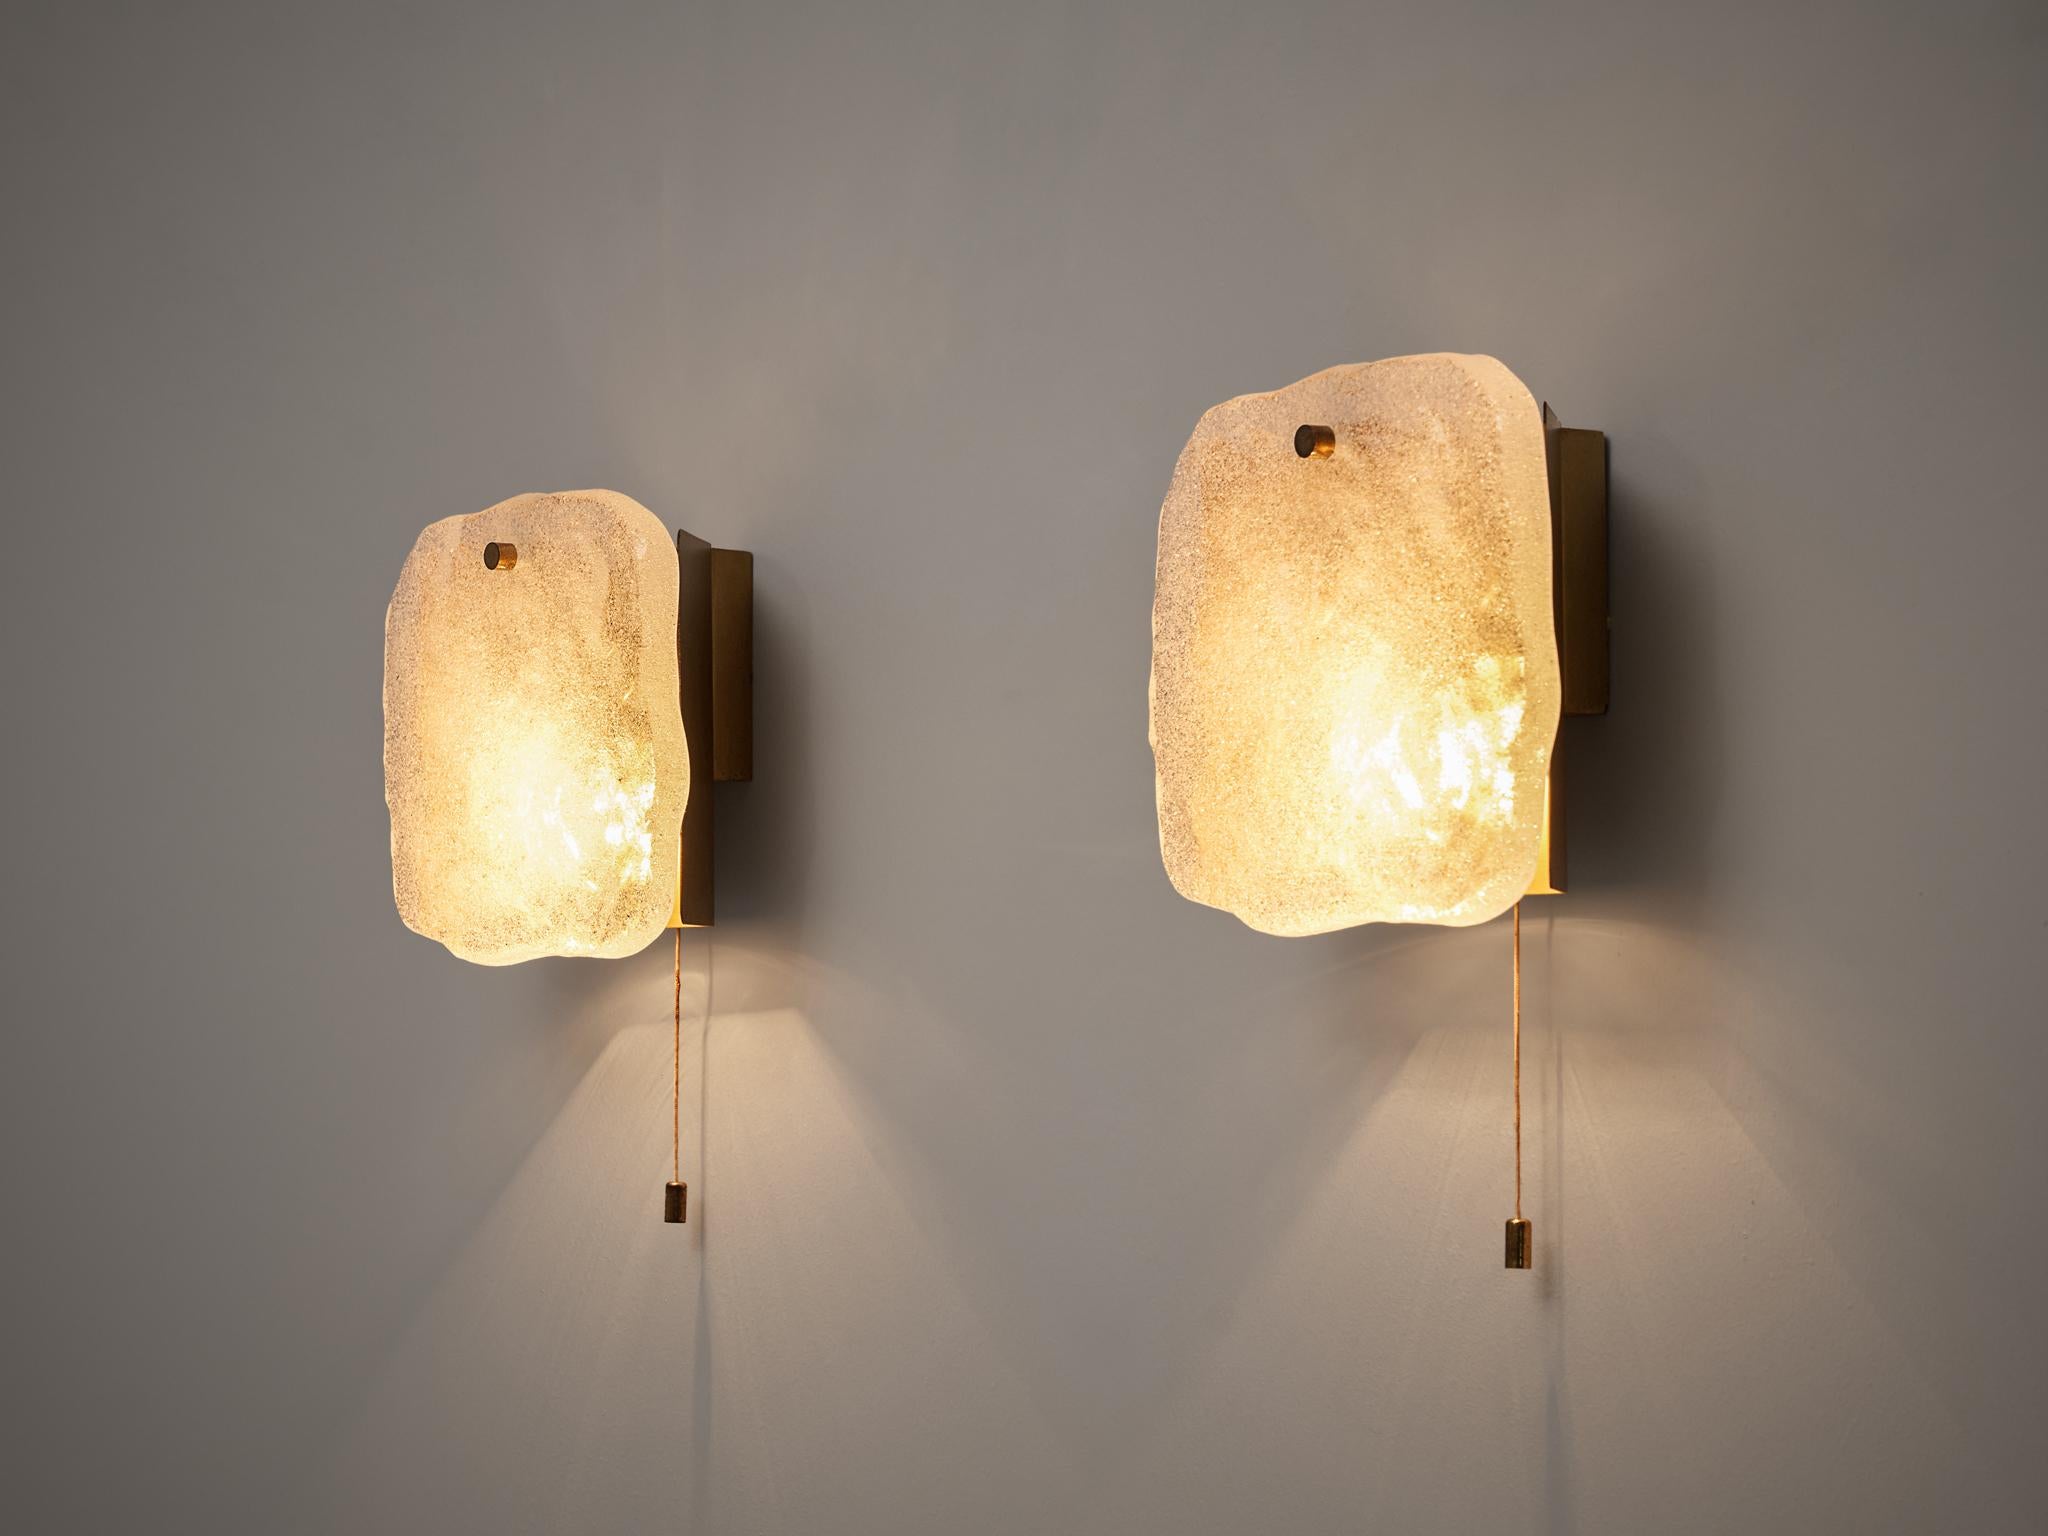 Wall lights, brass, glass, Europe, 1960s

A thick structures glass plate with curved contour hides the light bulb. The glass is fixated to the wall with a polygonal brass element. Due to the thick glass, the light partition is atmospheric, which